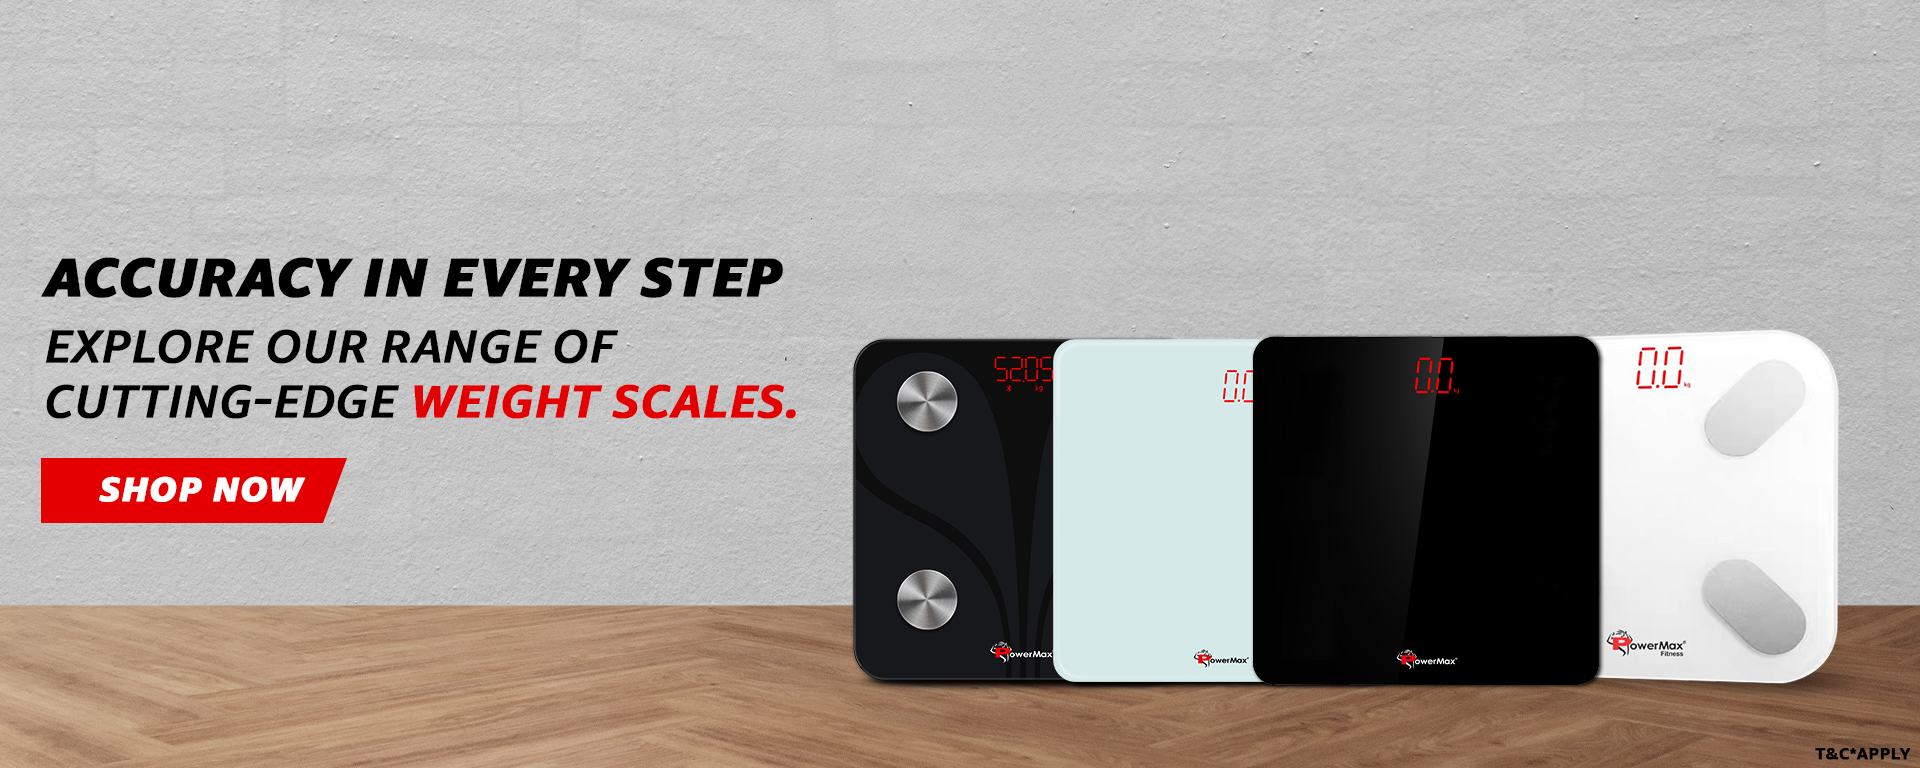 Pmx- Weighing Scale